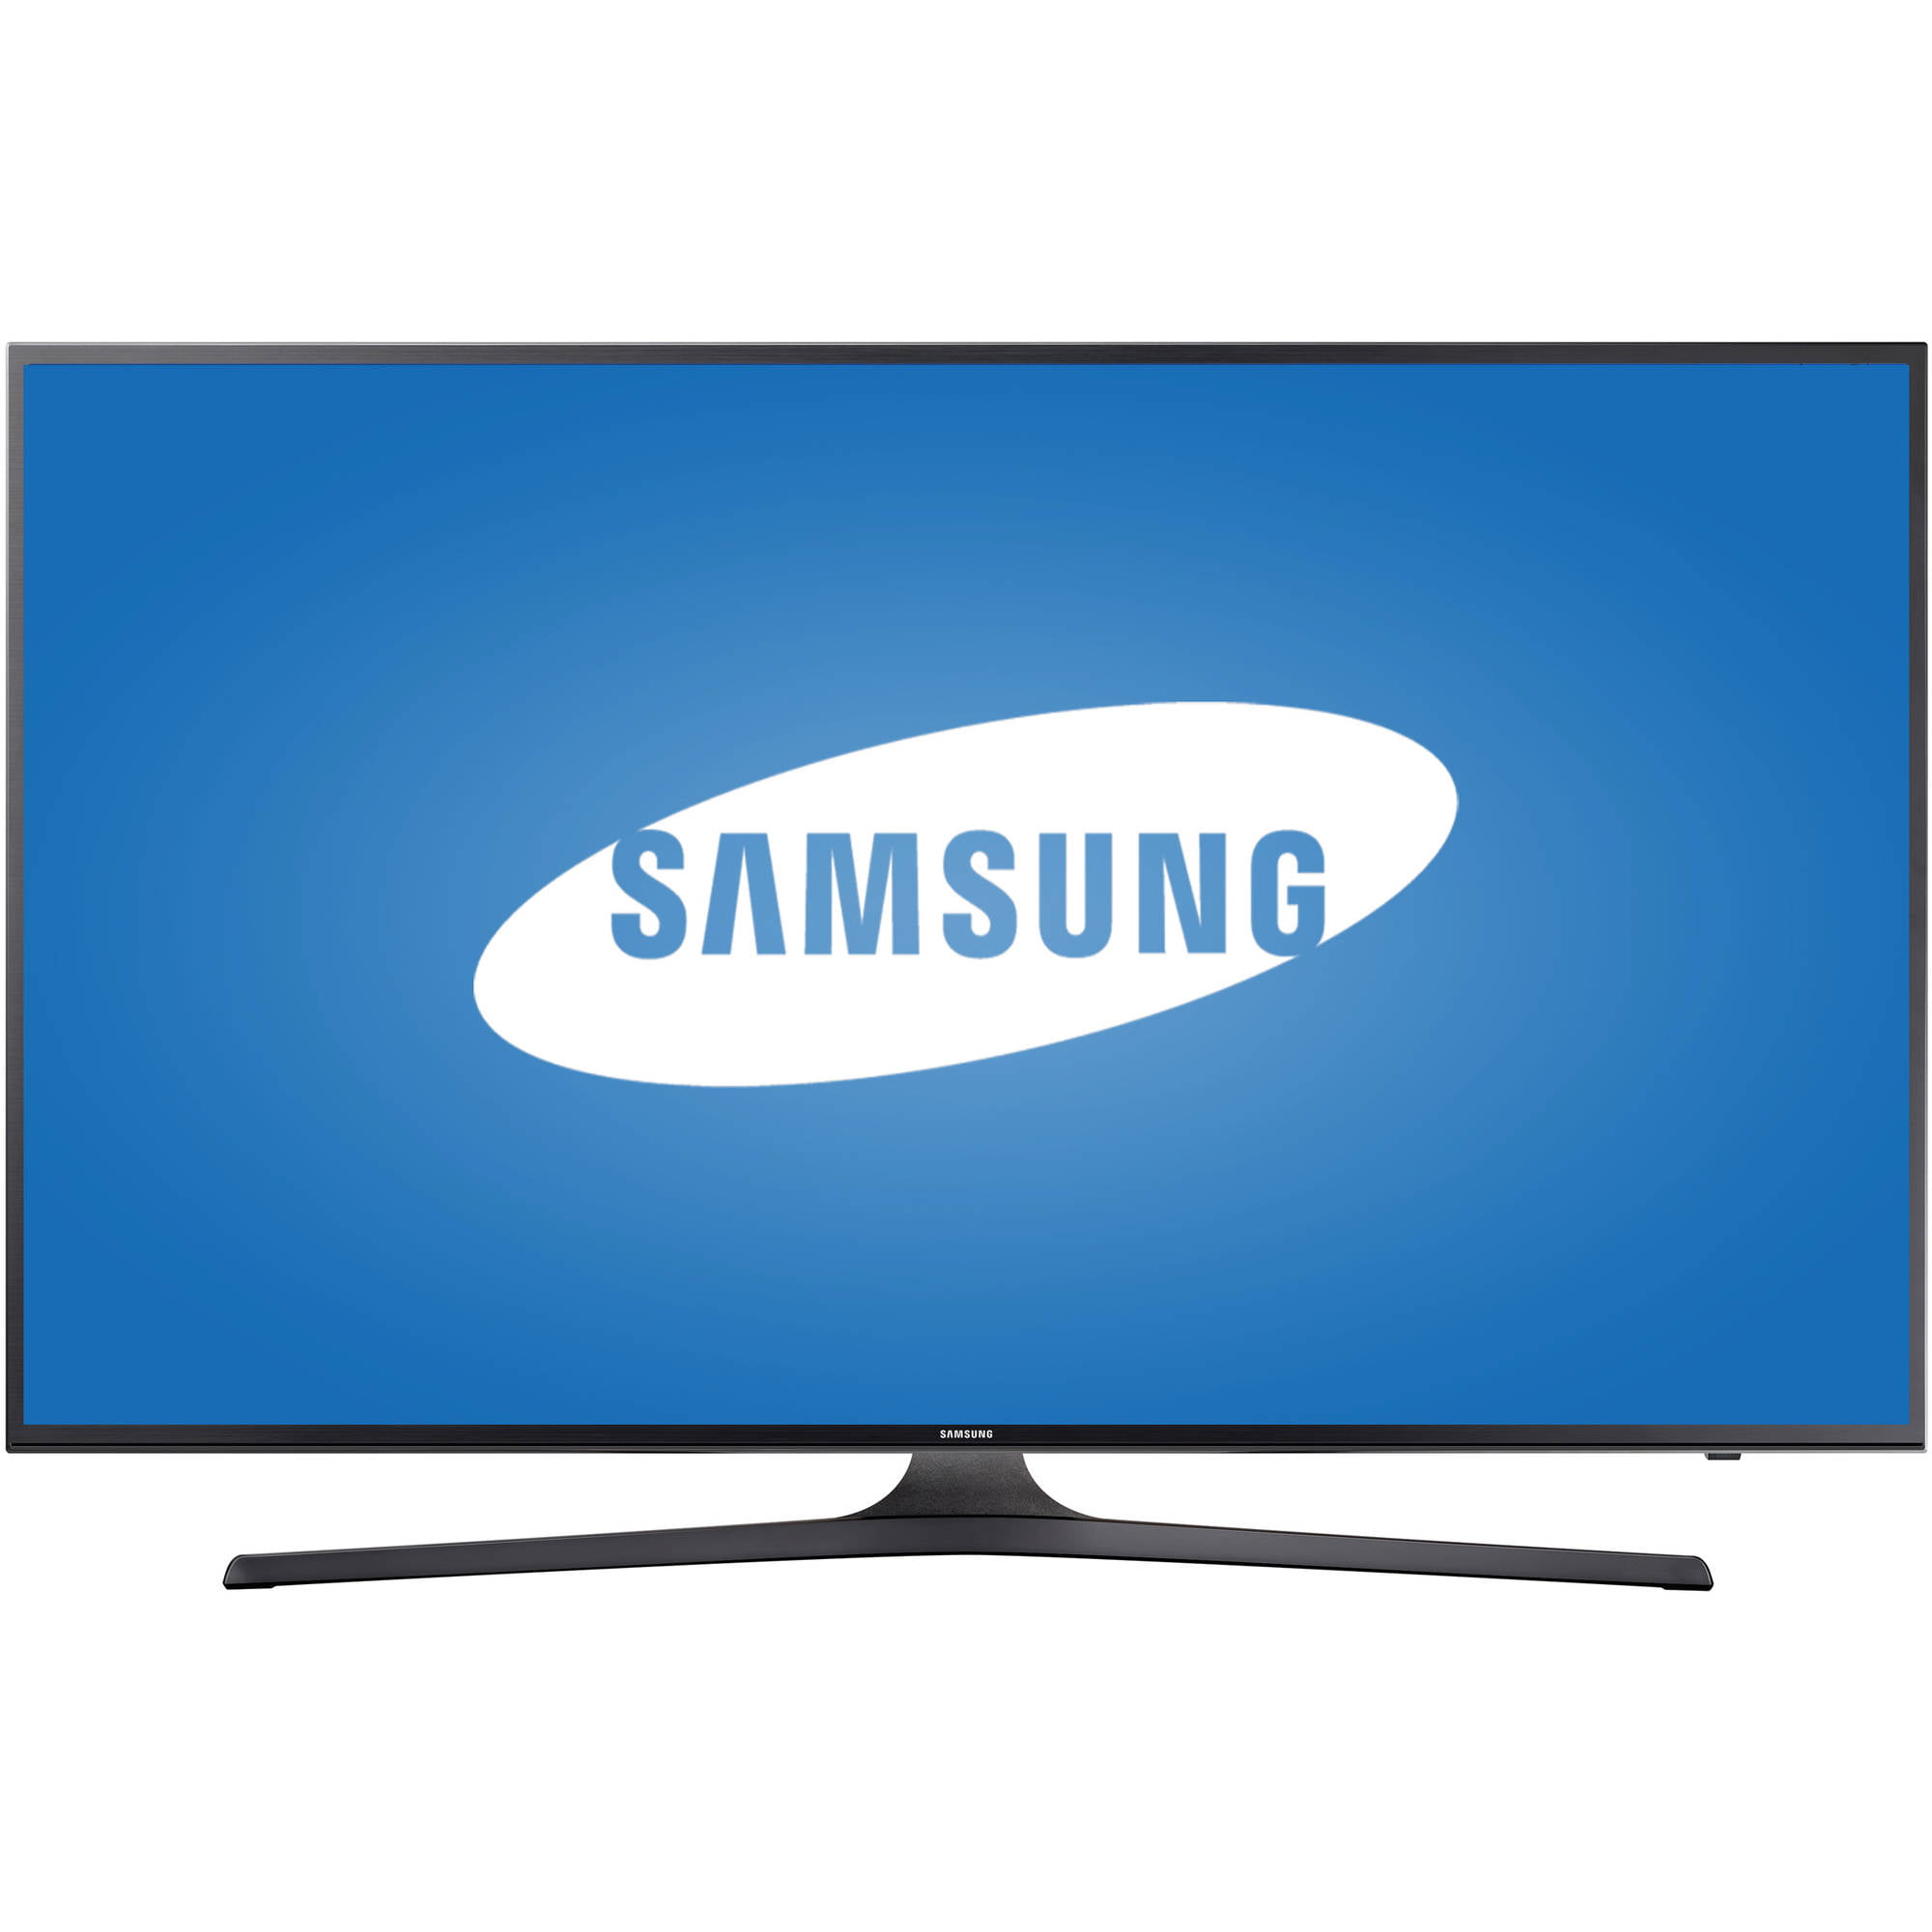 Cheap samsung televisions for sale